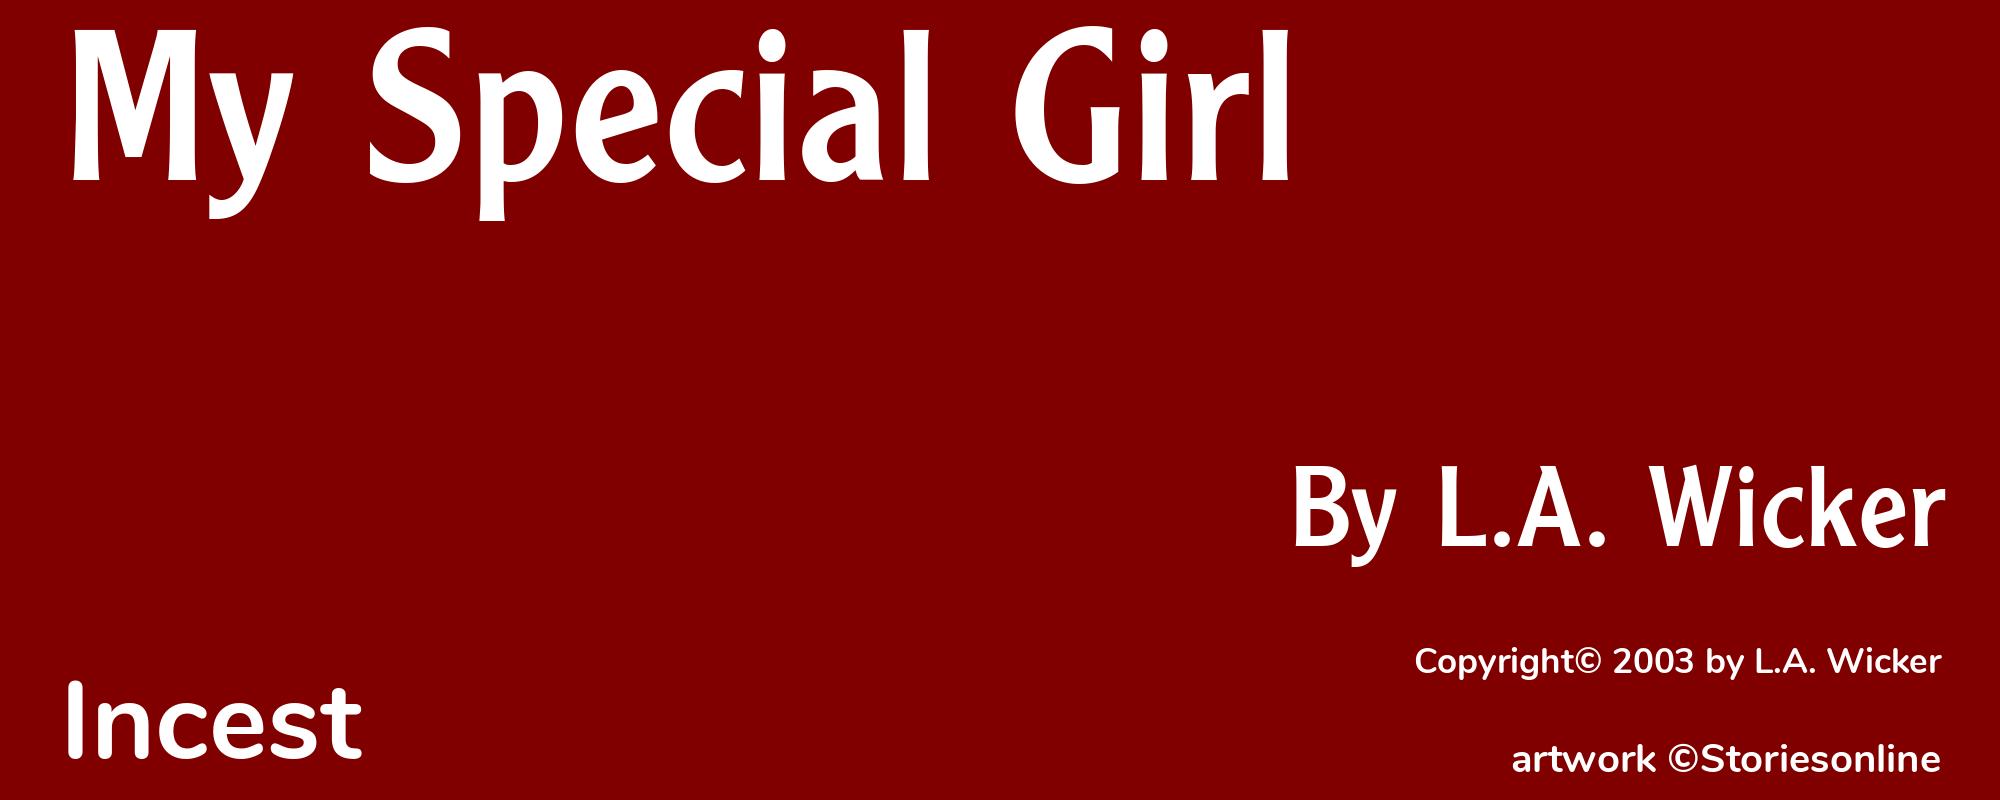 My Special Girl - Cover